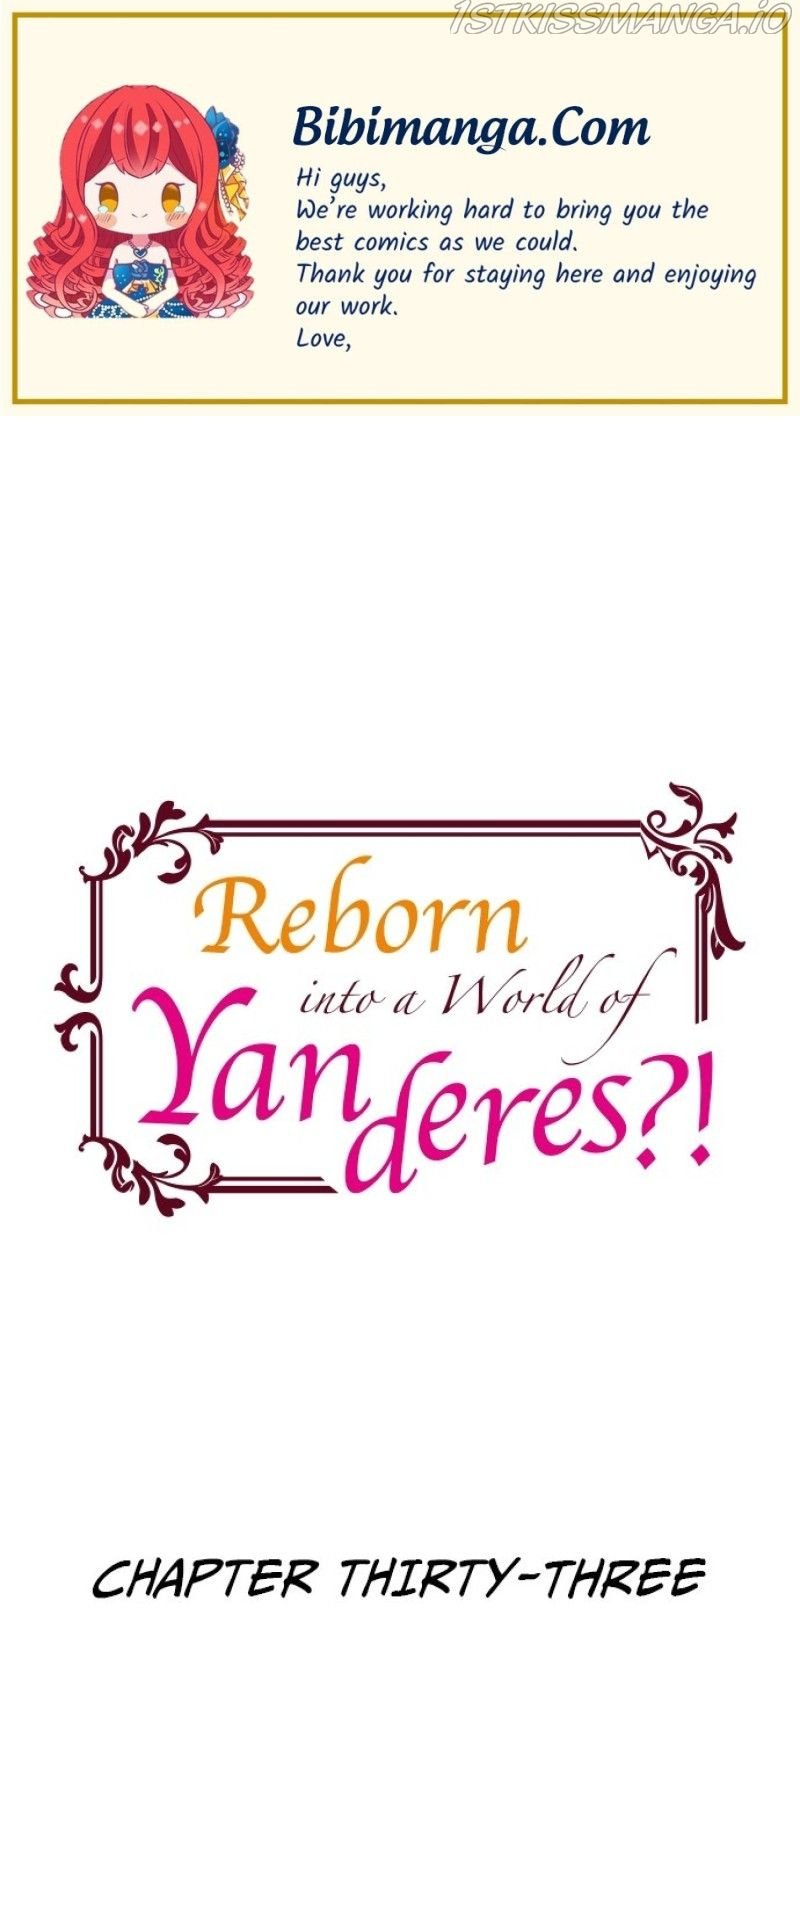 Reborn into a World of Yanderes?! chapter 33